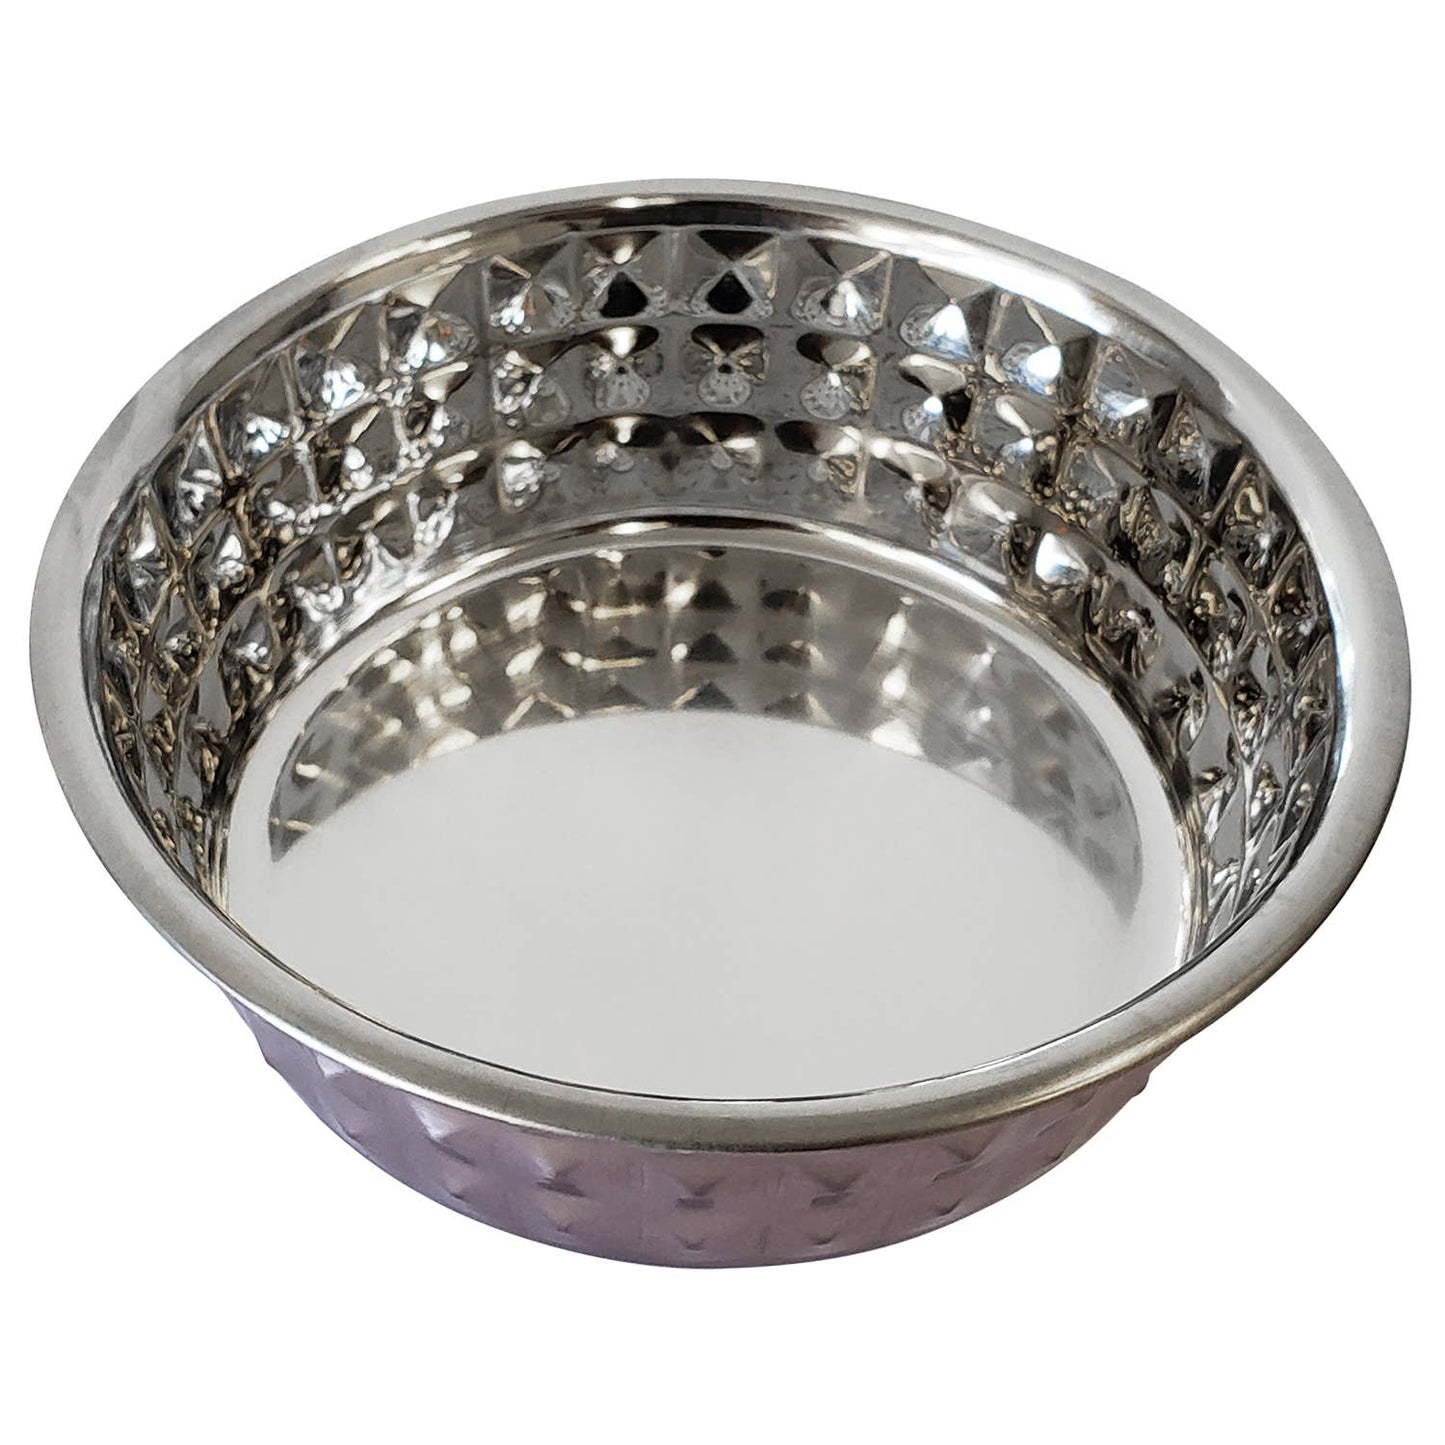 Lavender-Tinted Hammered Eco Stainless Steel Pet Bowl: 32 oz